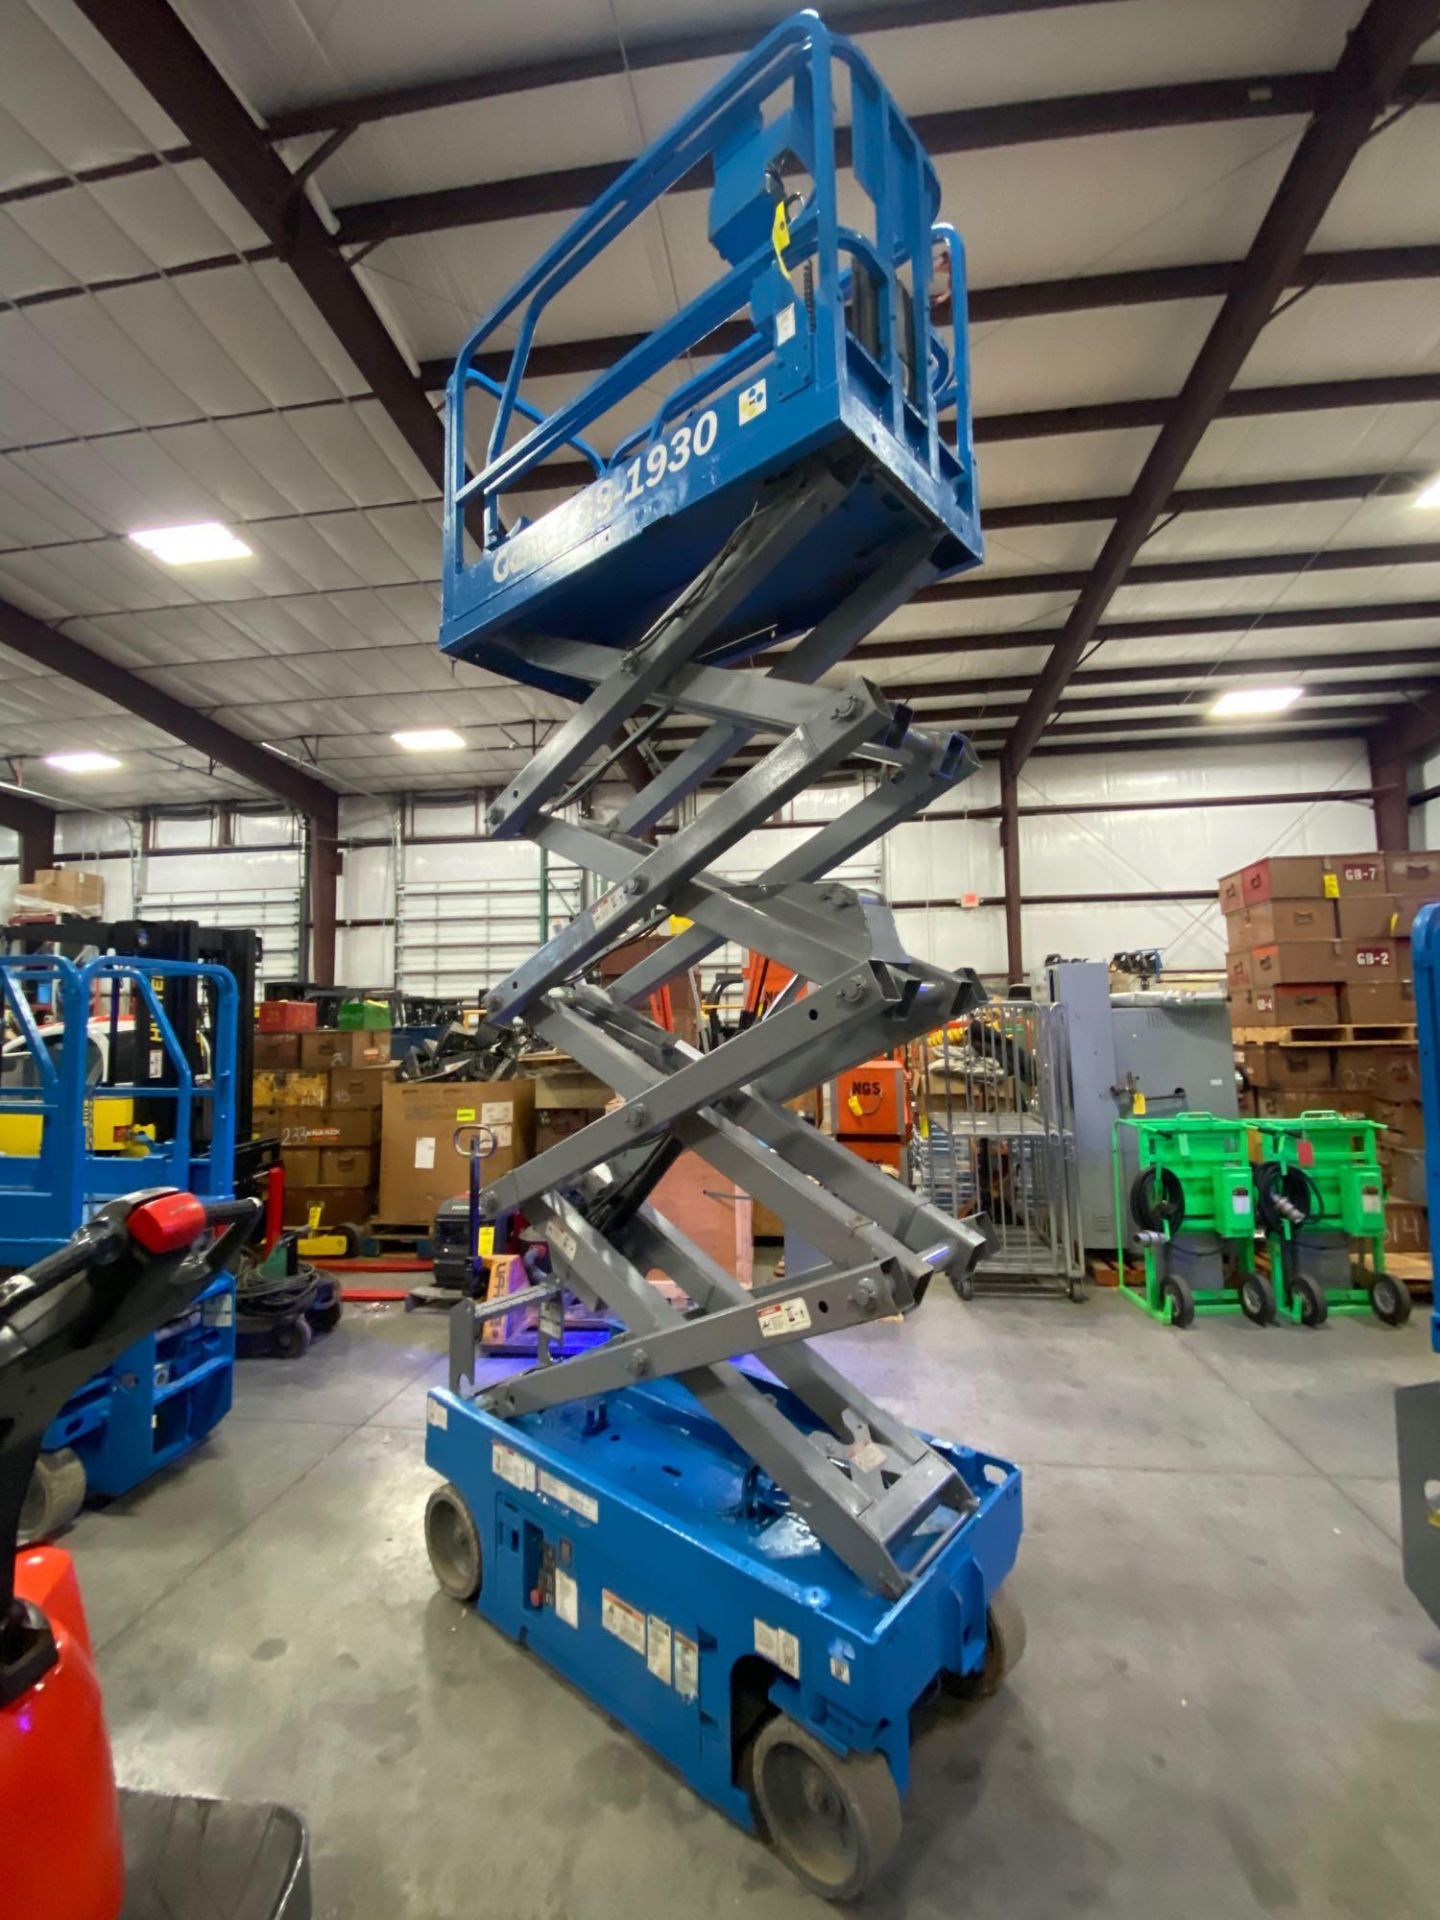 GENIE GS-1930 ELECTRIC SCISSOR LIFT, SELF PROPELLED, 19' PLATFORM HEIGHT, BUILT IN BATTERY CHARGER, - Image 4 of 4